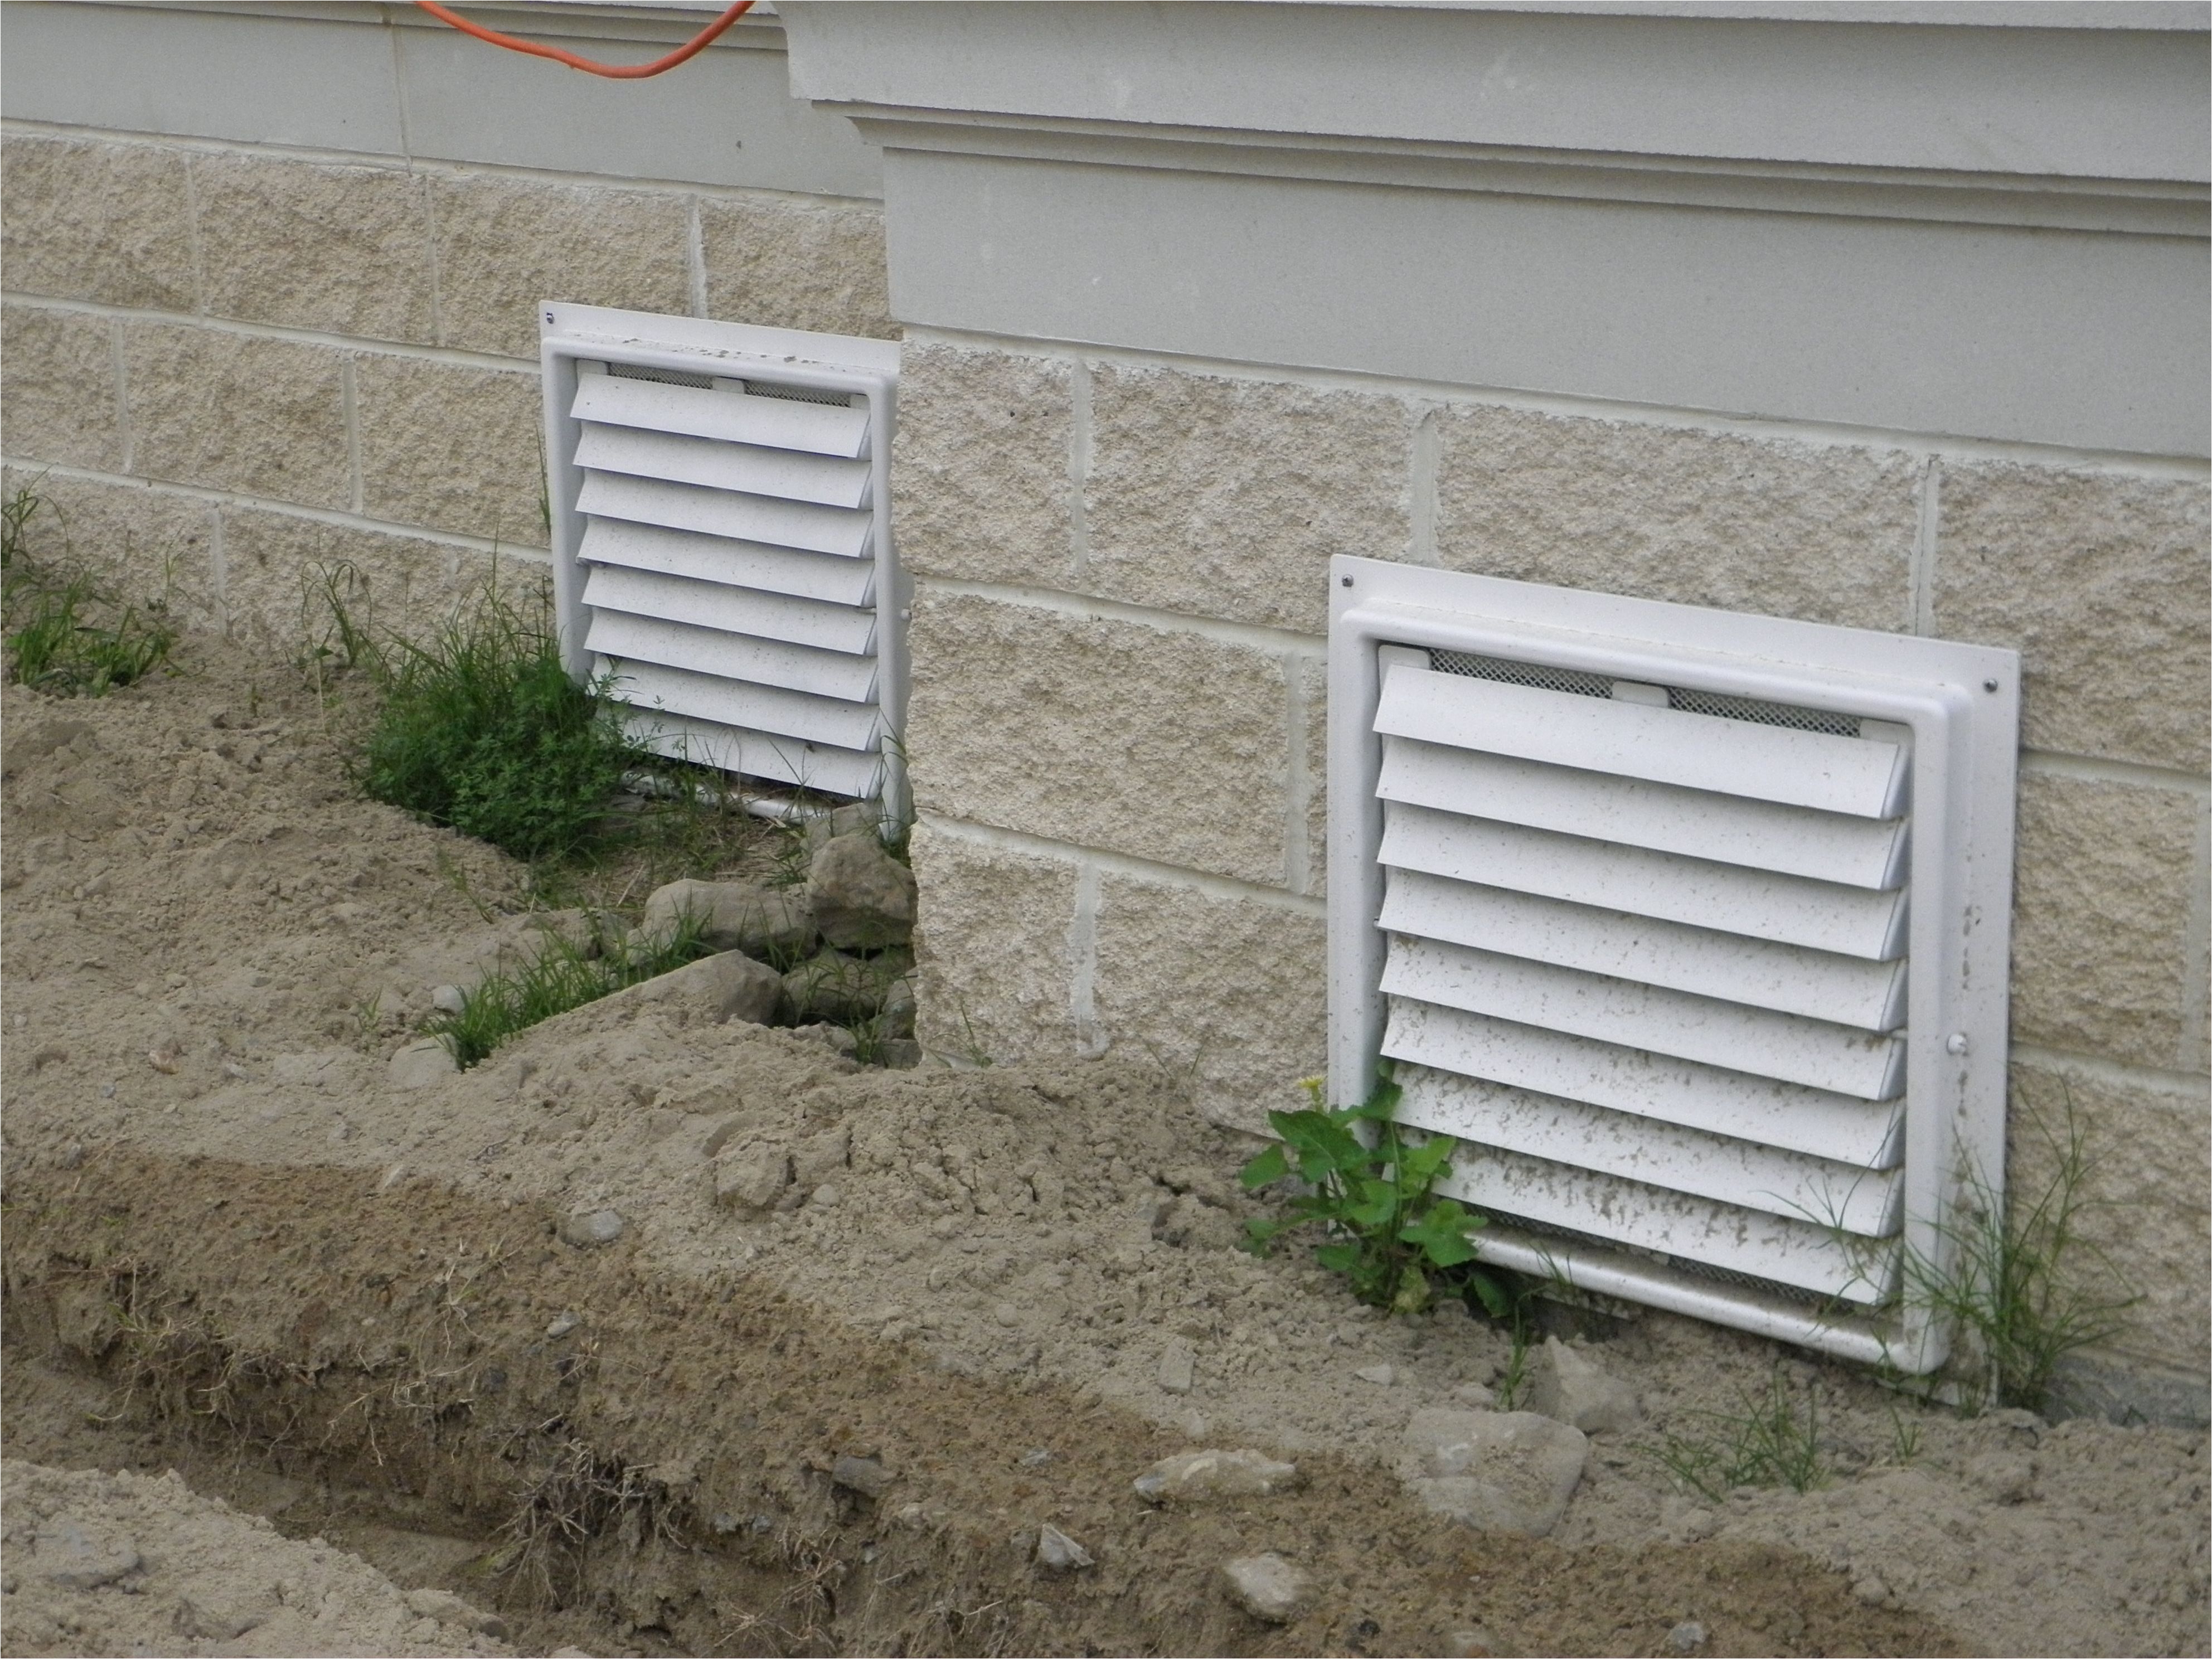 16x16 flood vents painted white installed on a house in virginia beach va